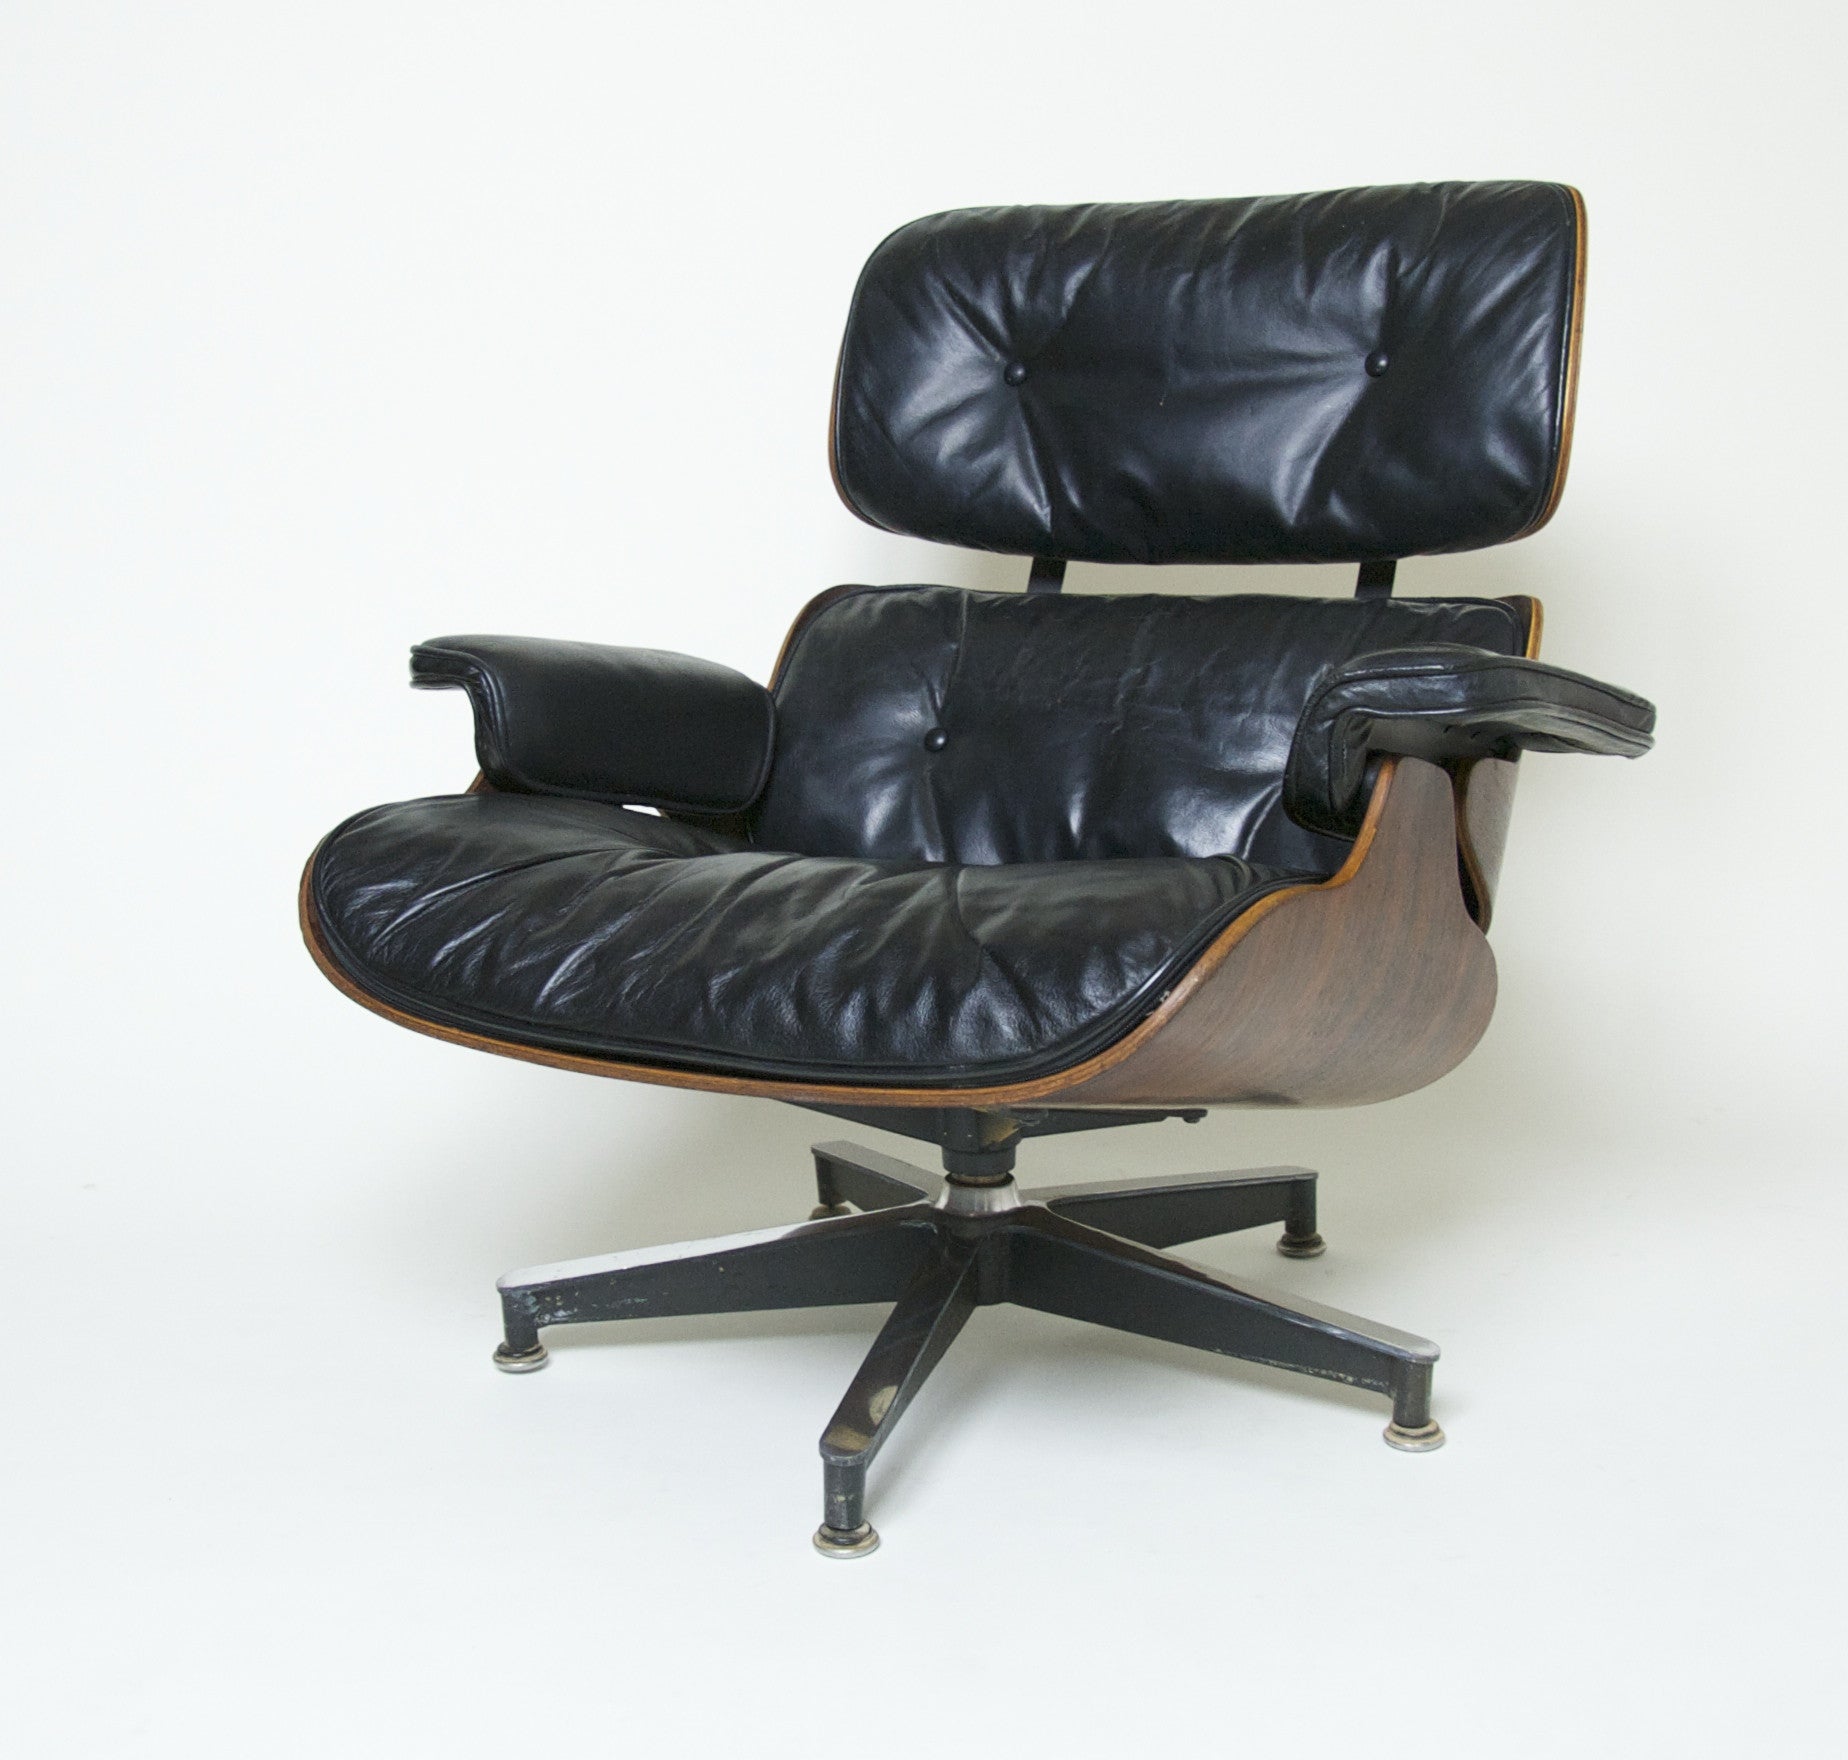 SOLD 1956 Herman Miller Eames Lounge Chair & Ottoman Rosewood with Boot Glides 670 671